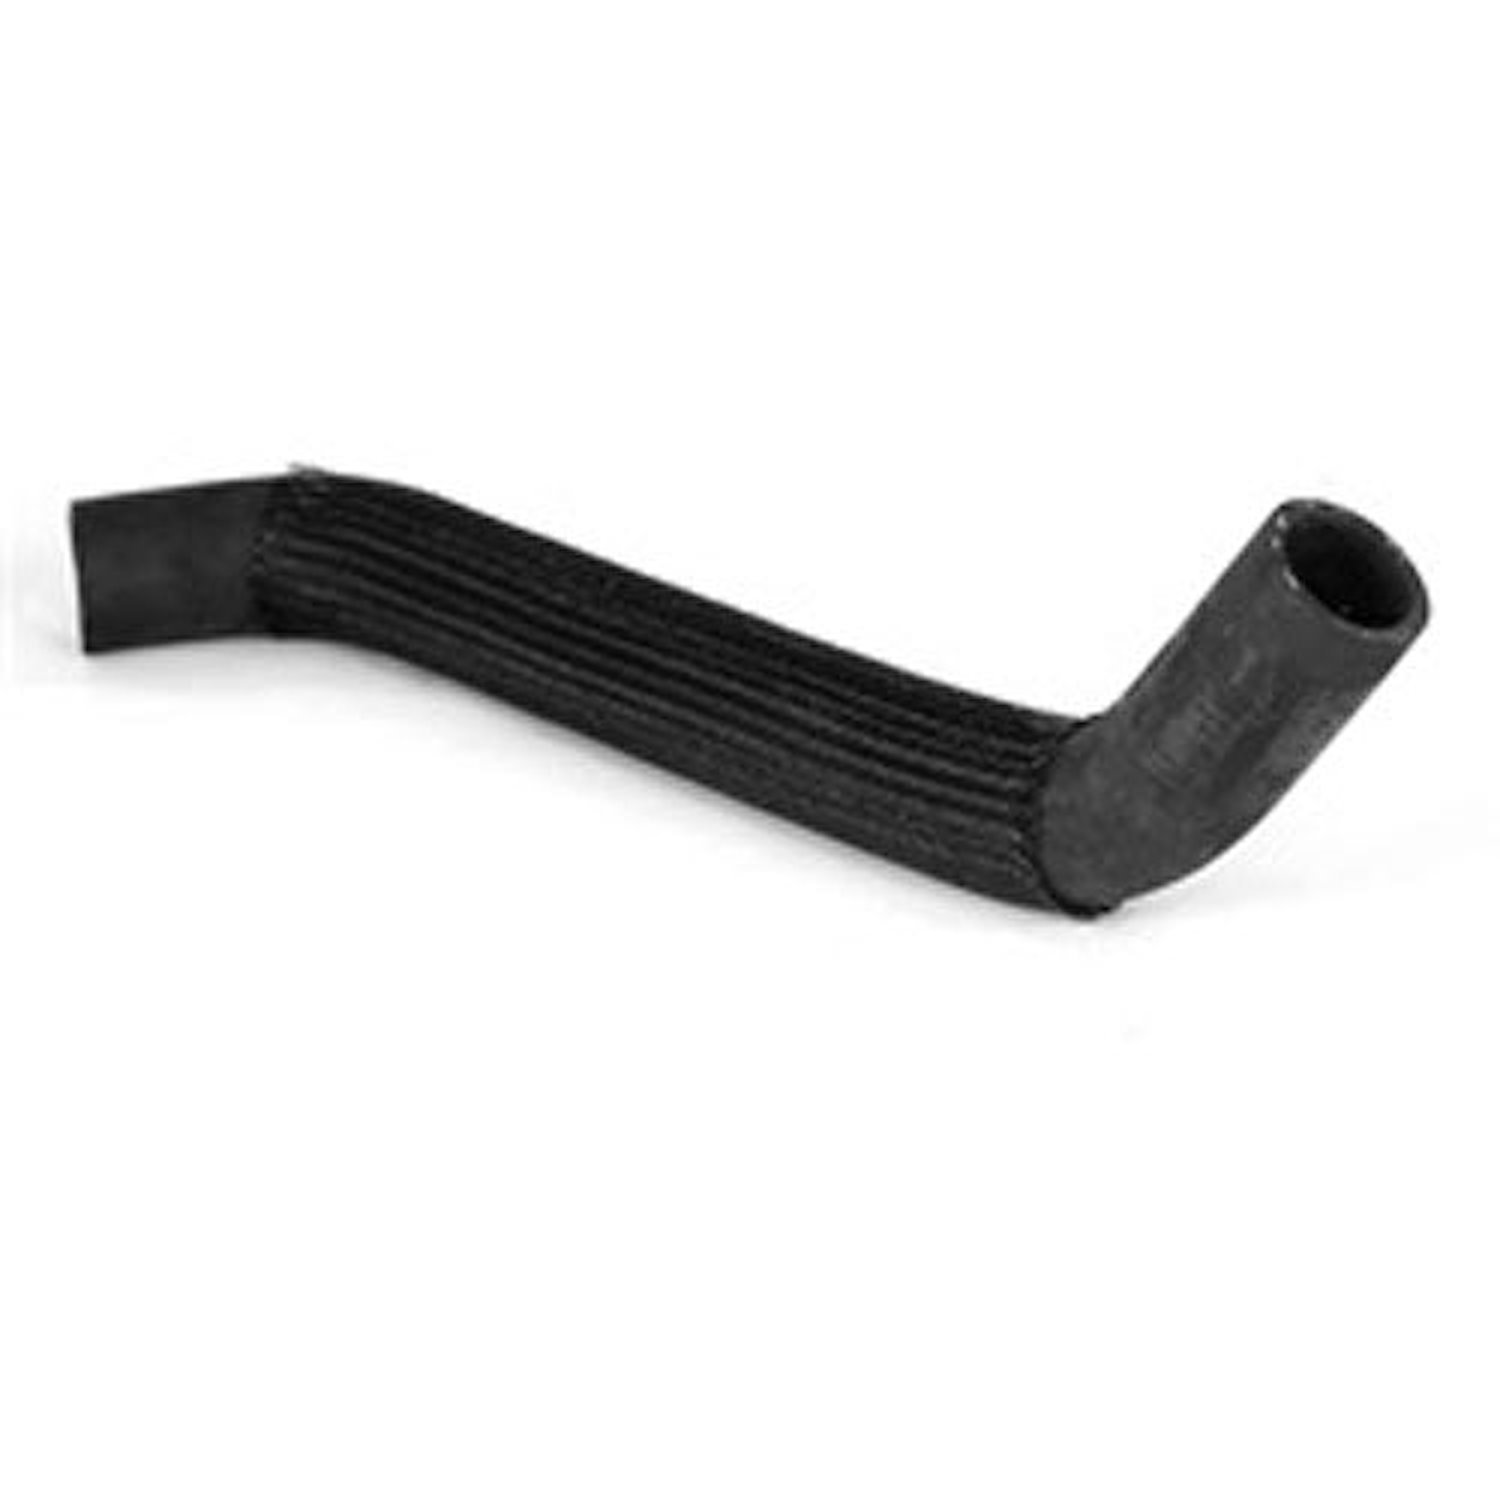 This Upper Radiator Hose By Omix-ADA Fits 12-16 Jeep Wrangler JK With 3.6L